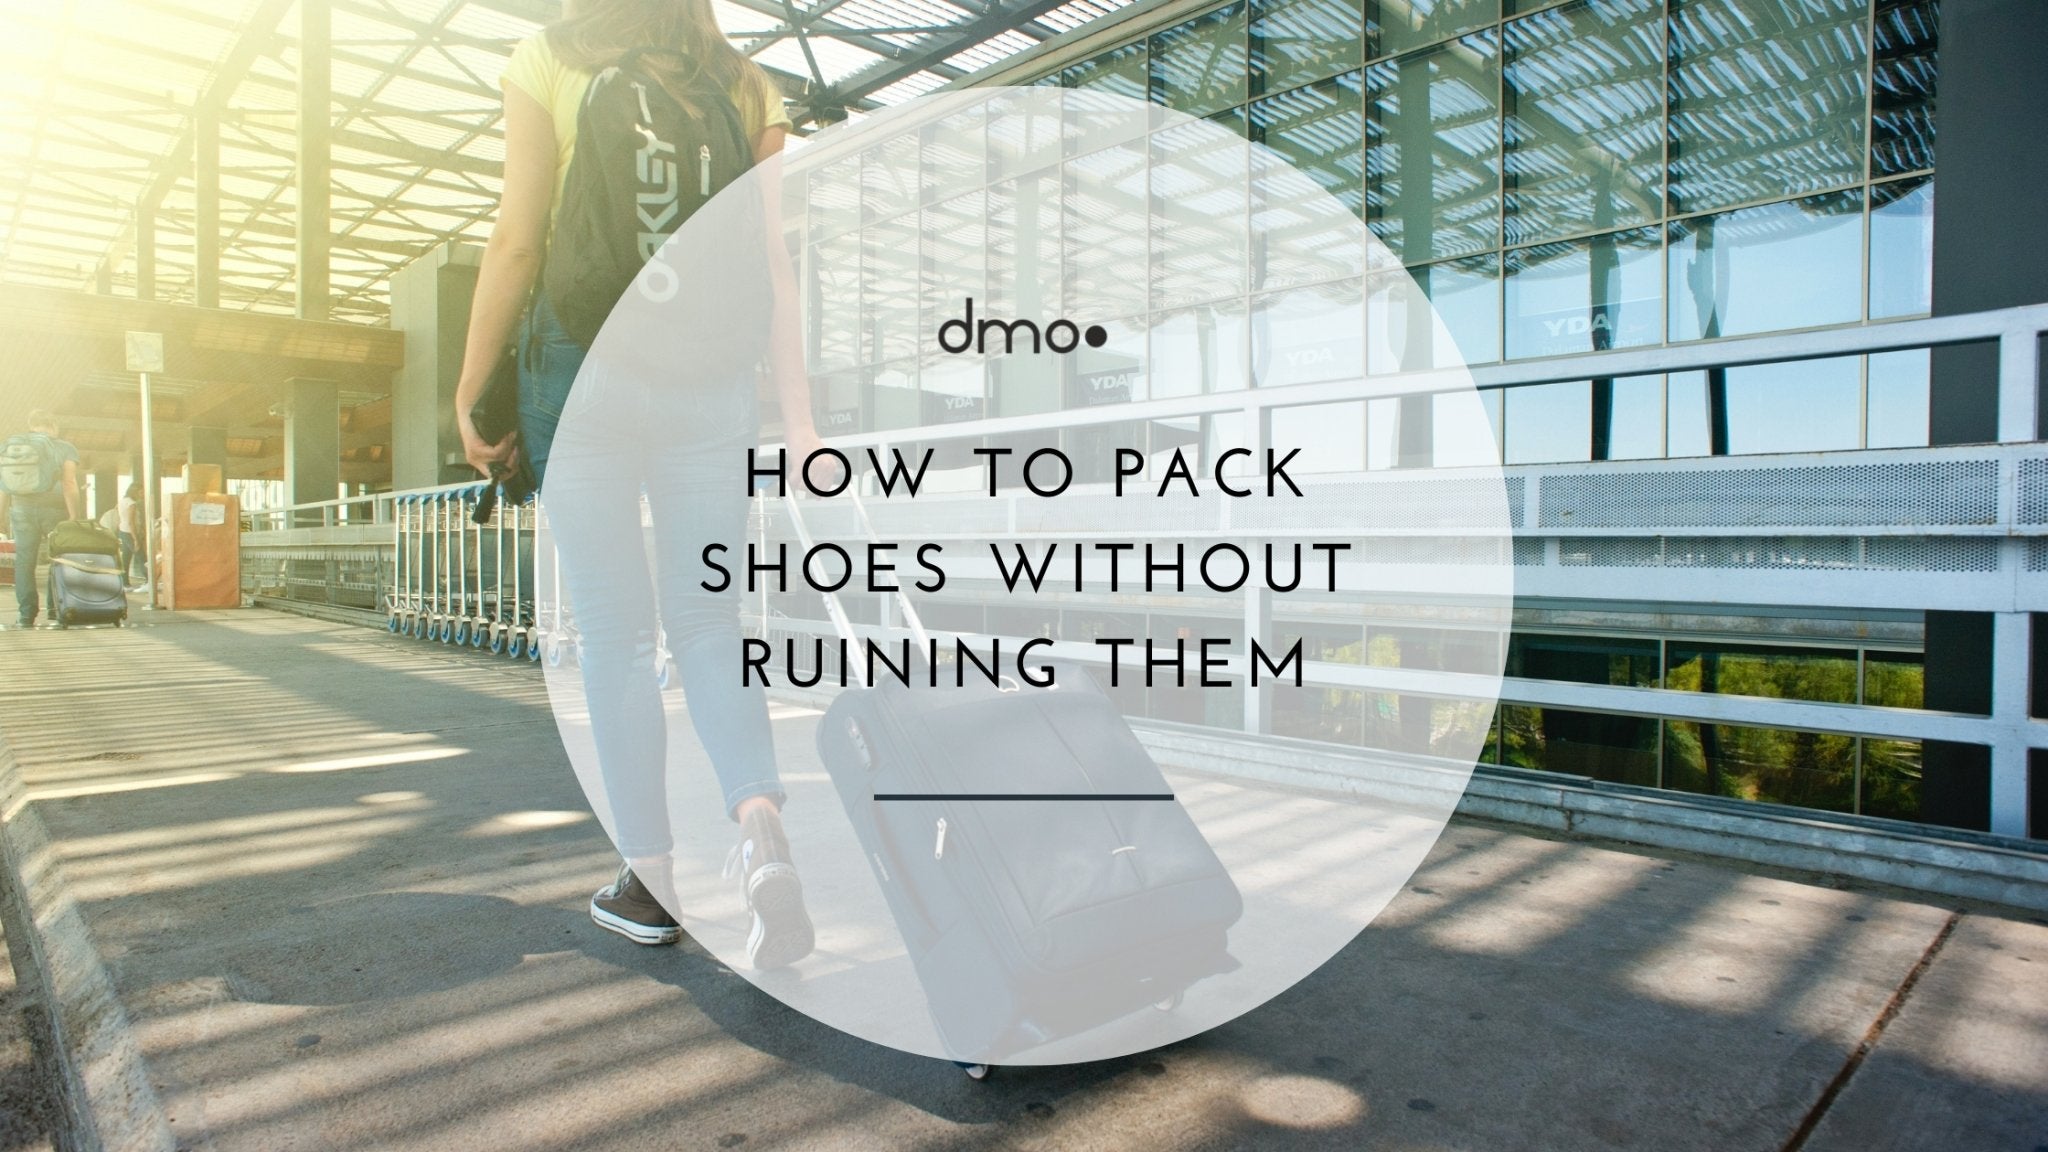 How to pack shoes without ruining them - dmodot Shoes